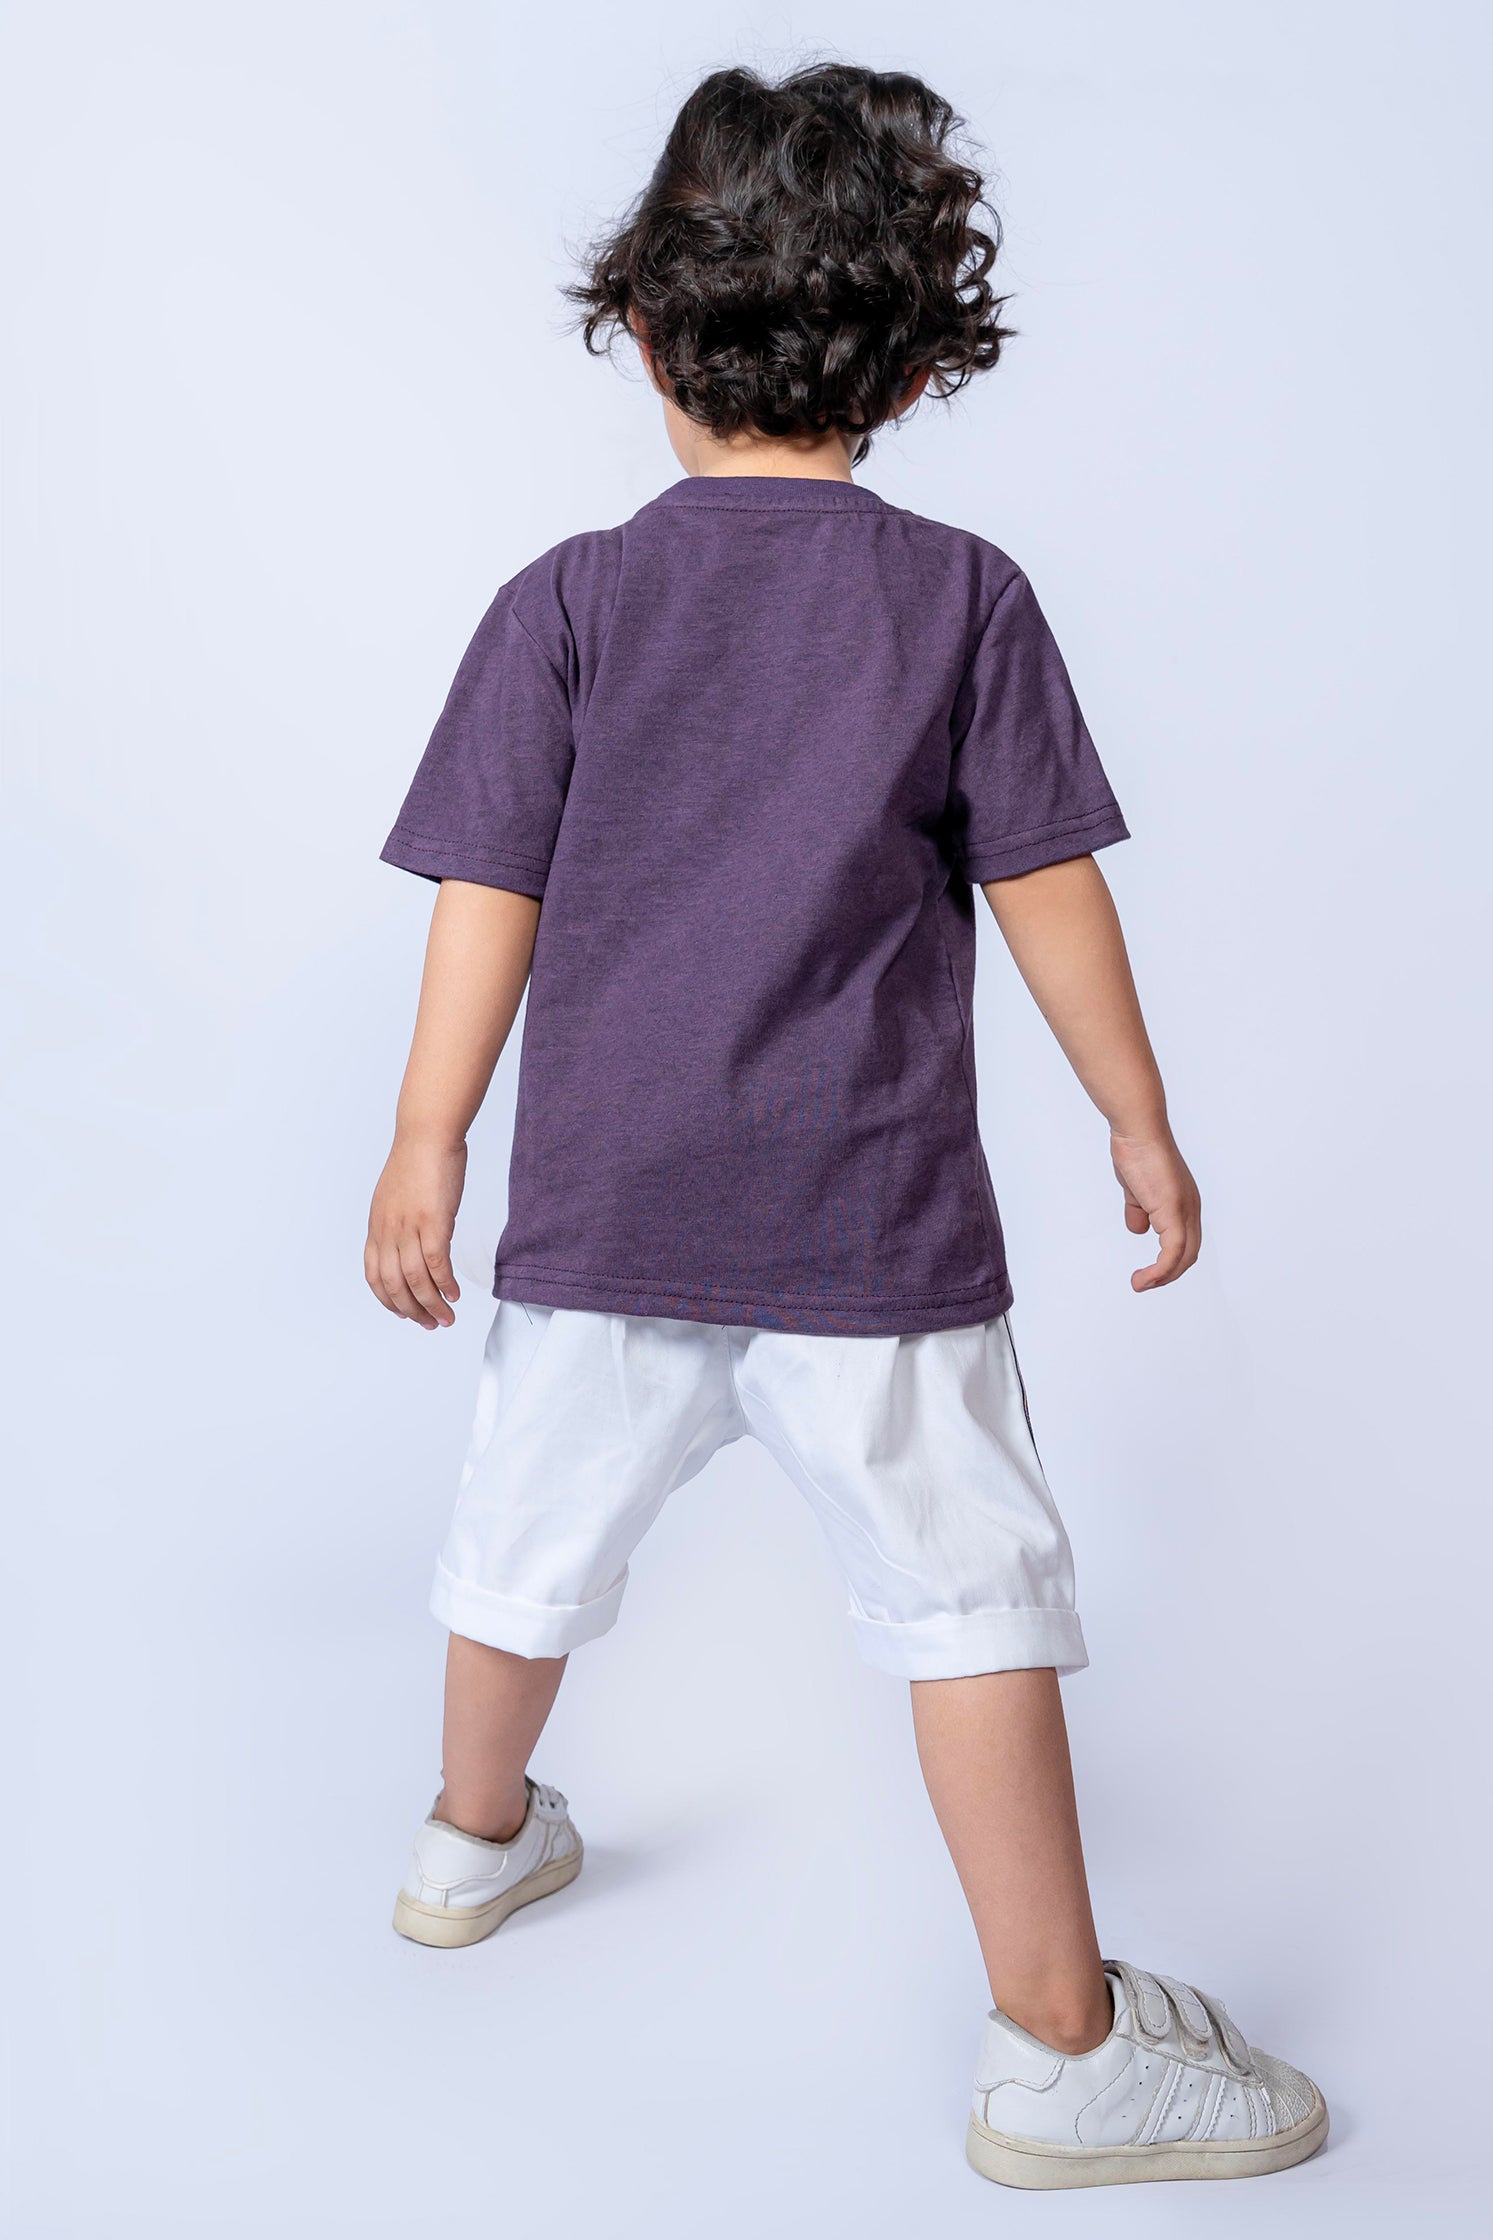 KIDS T SHIRT PURPLE WITH "CATCH THE WAVE" PRINTING